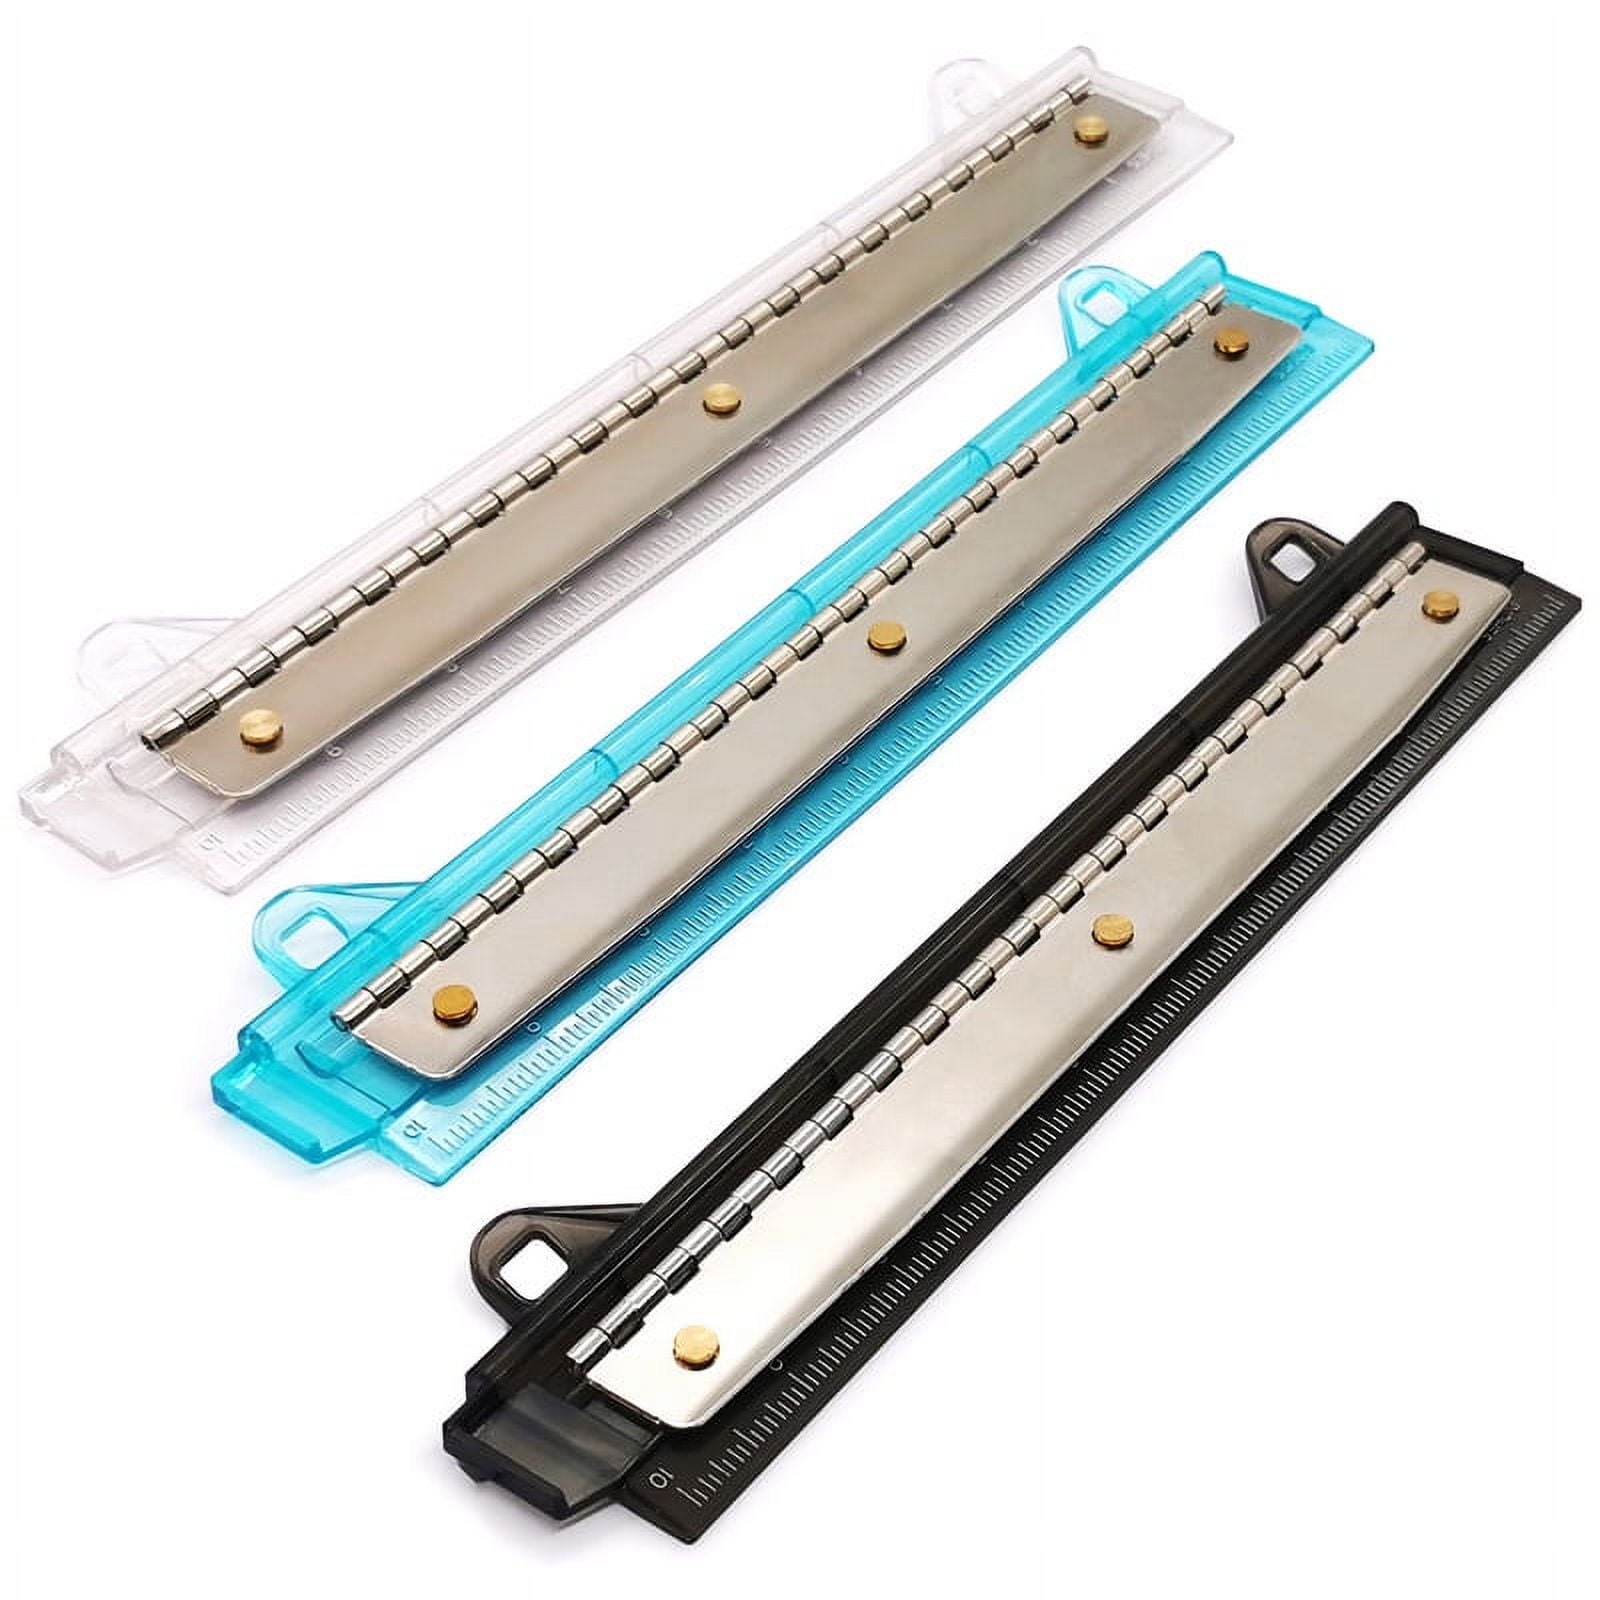 Pen Gear 3 Hole Punch with Ruler Ring Binder 3 Sheets Assorted Colors e0eda28a 6152 4e82 9aae 32cd14e44d98.fb2d4e527869862a52e756f550b5cd24